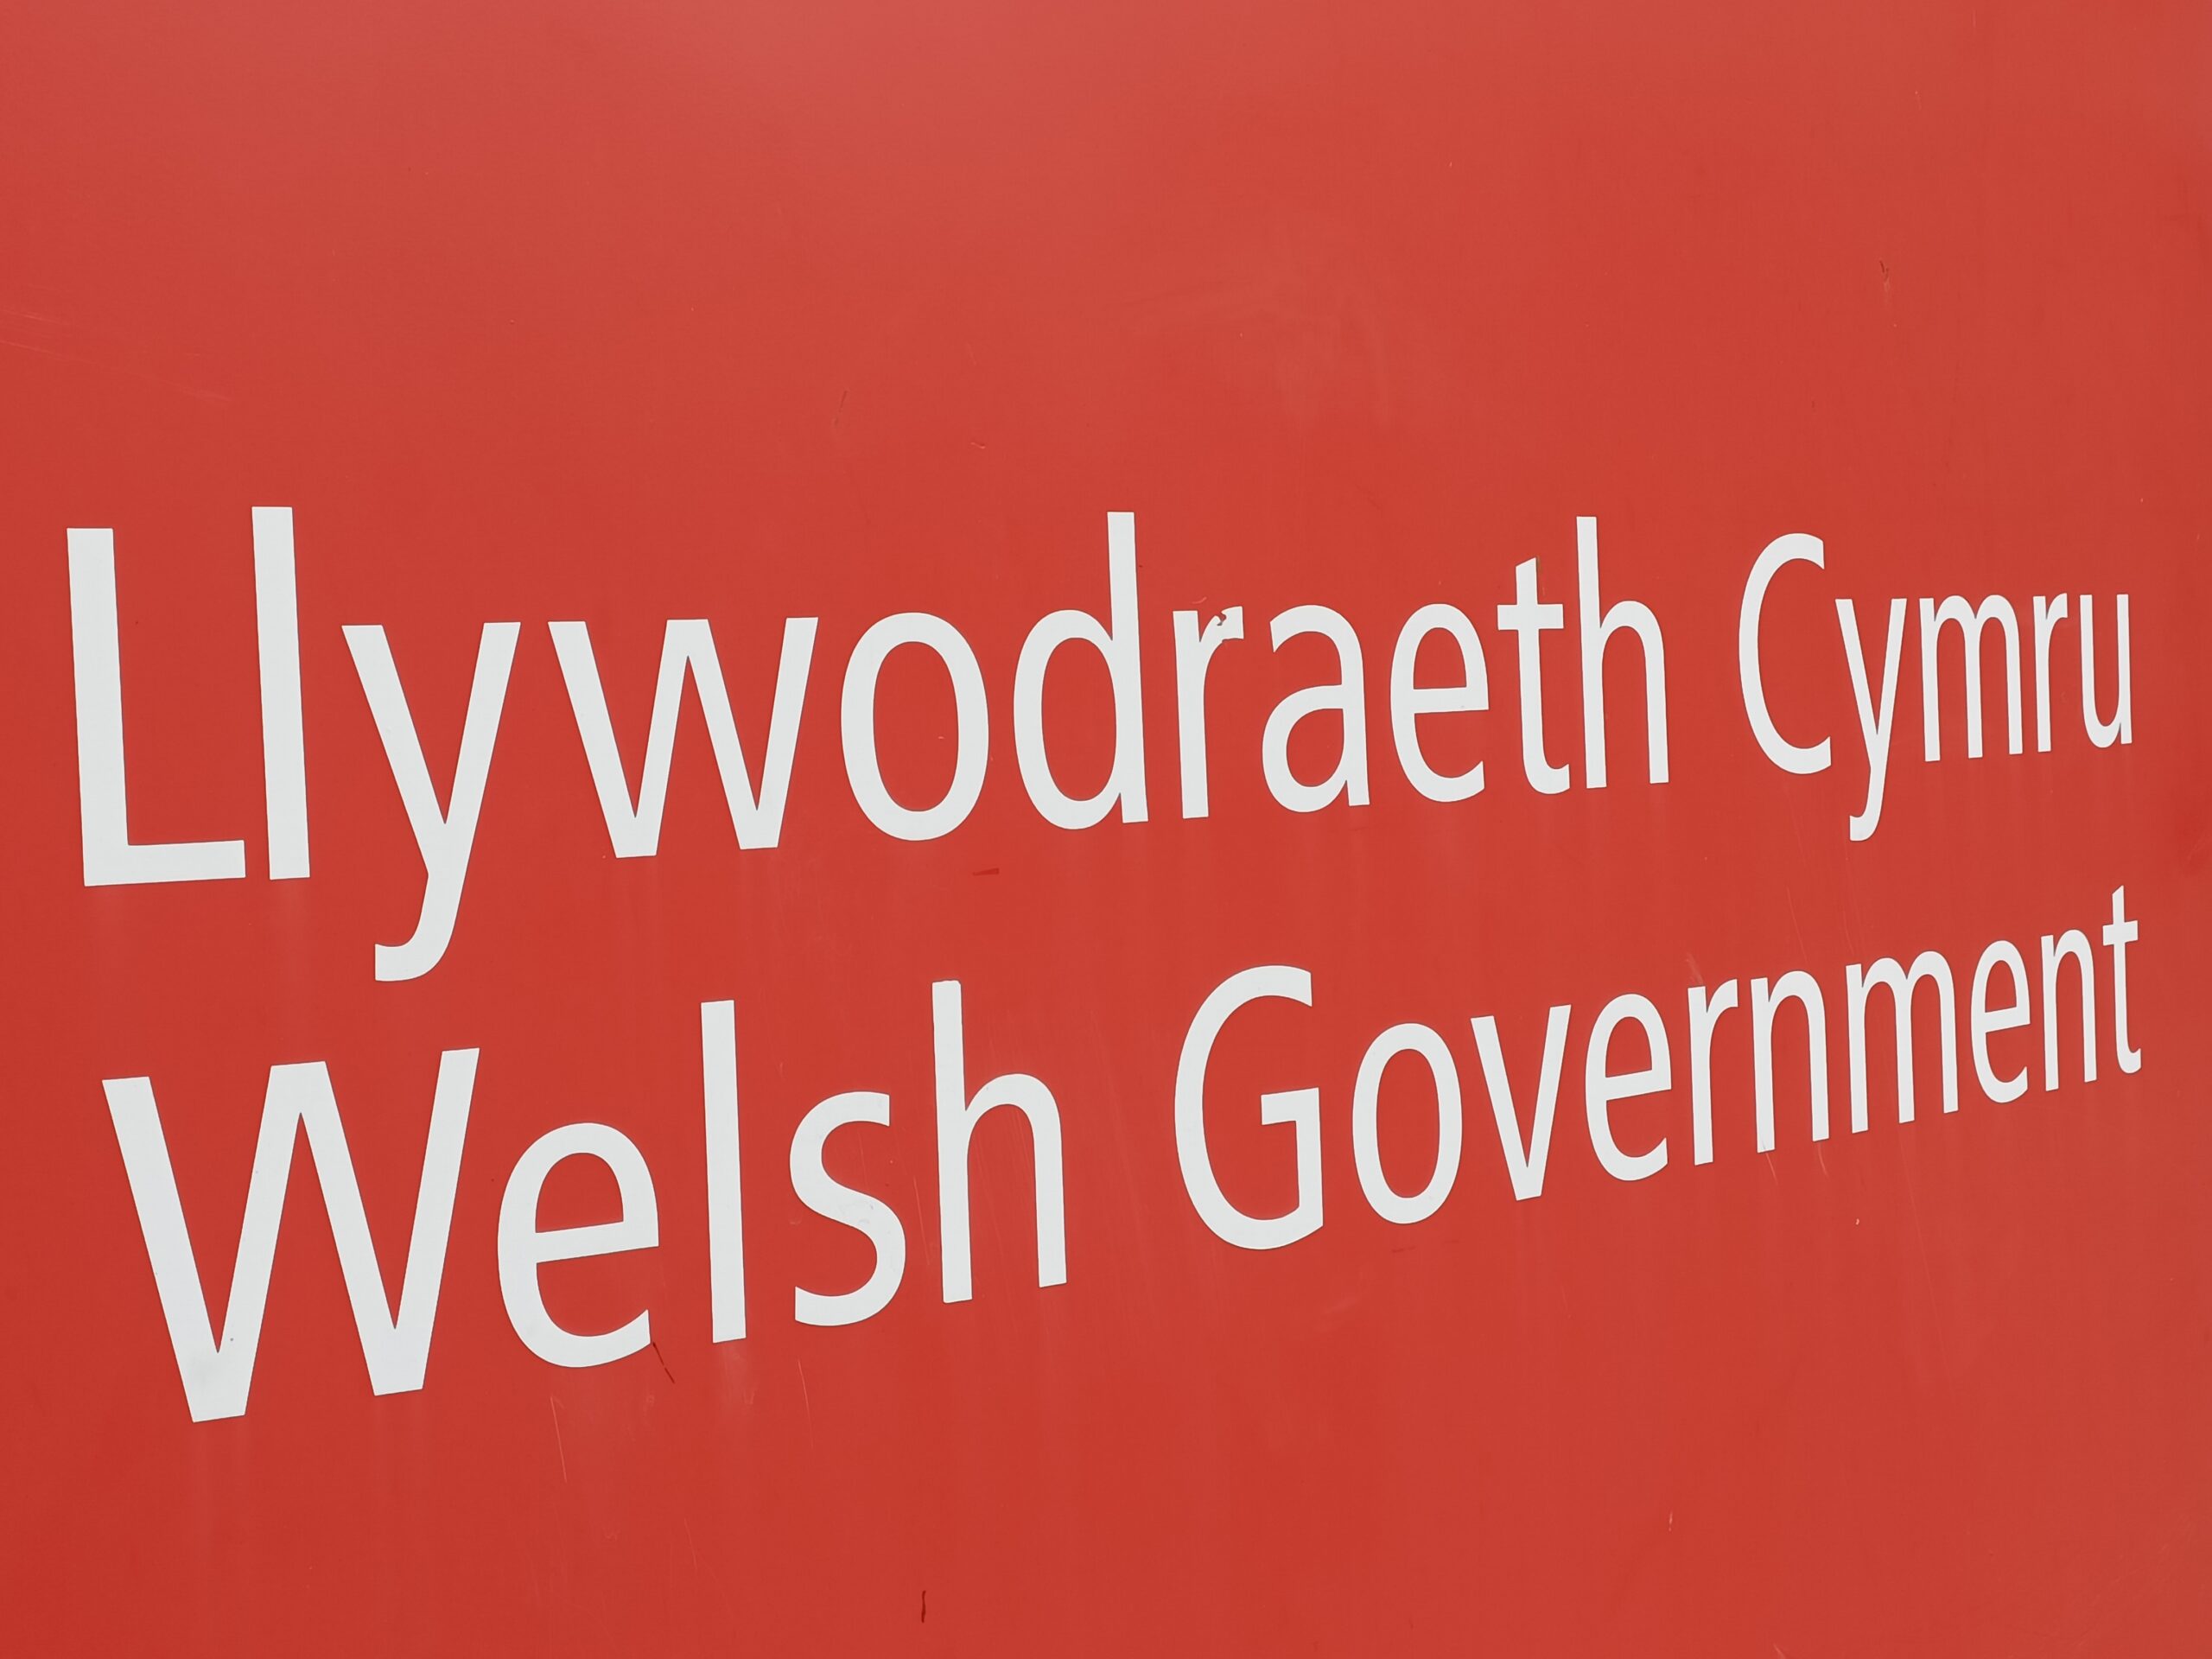 Welsh Government respond to comments made by Prime Minister Rishi Sunak on 20mph default speed limit